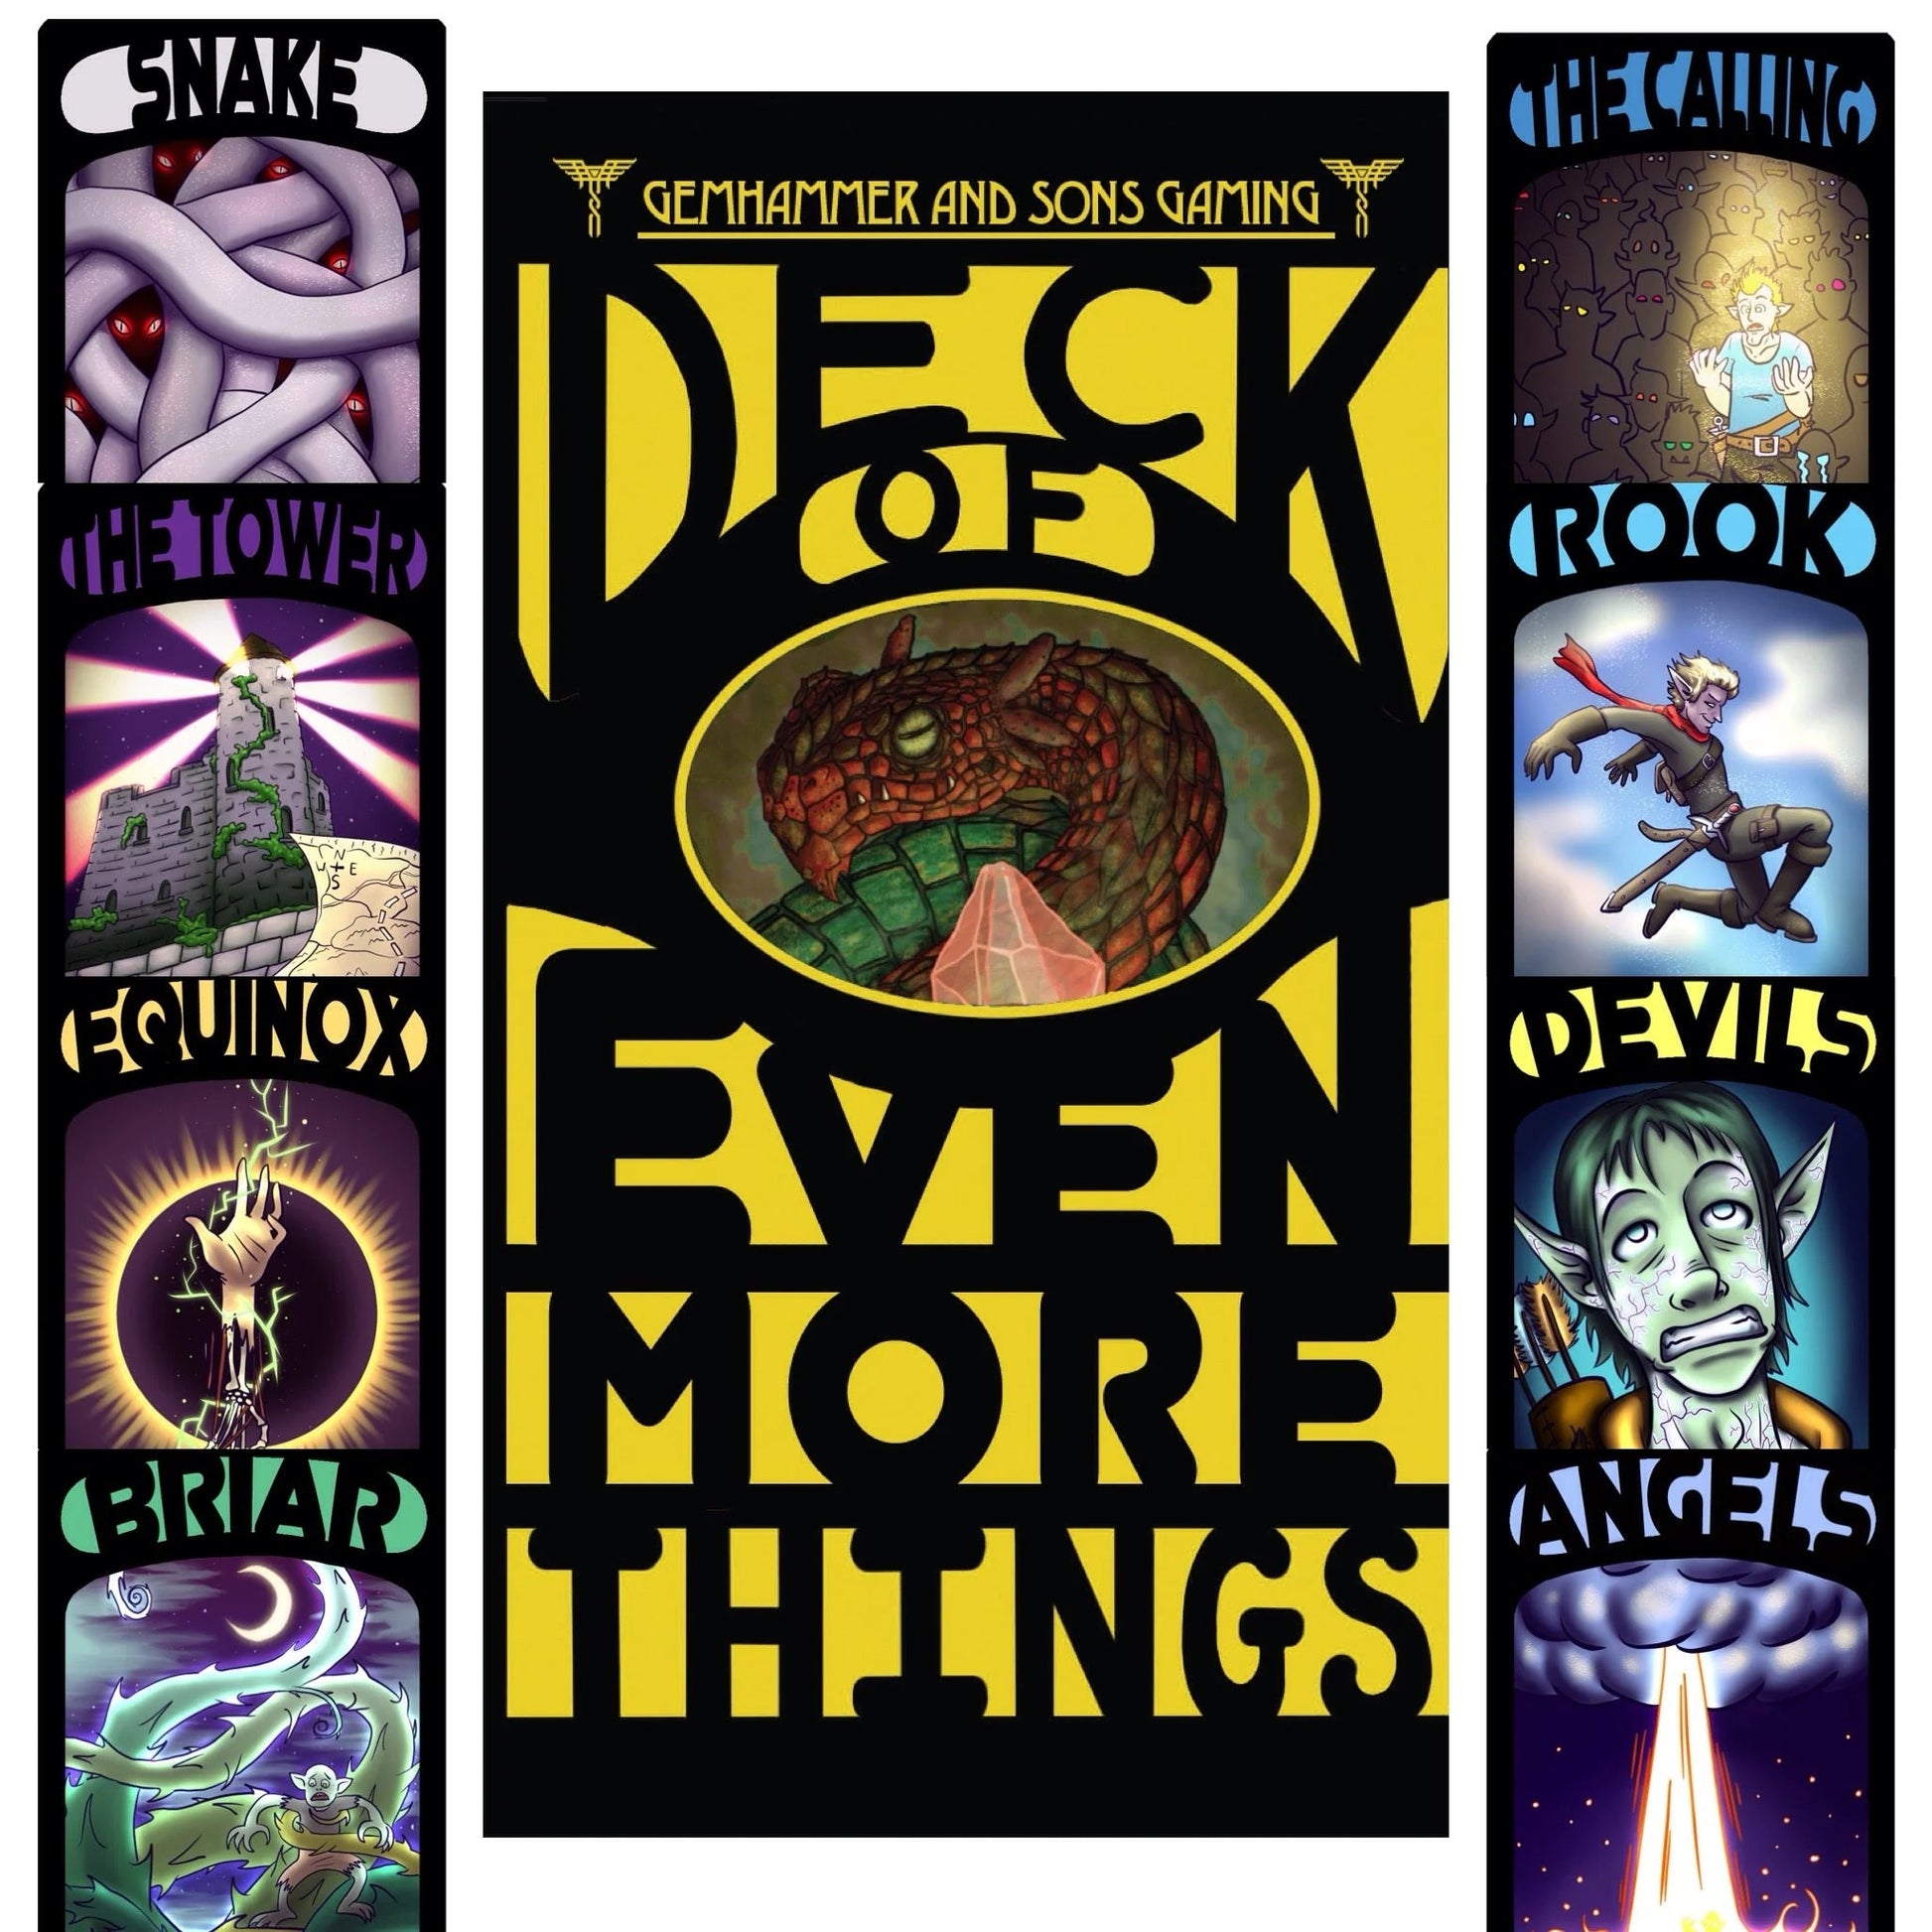 All The Decks of Many Things! – Gemhammer and Sons